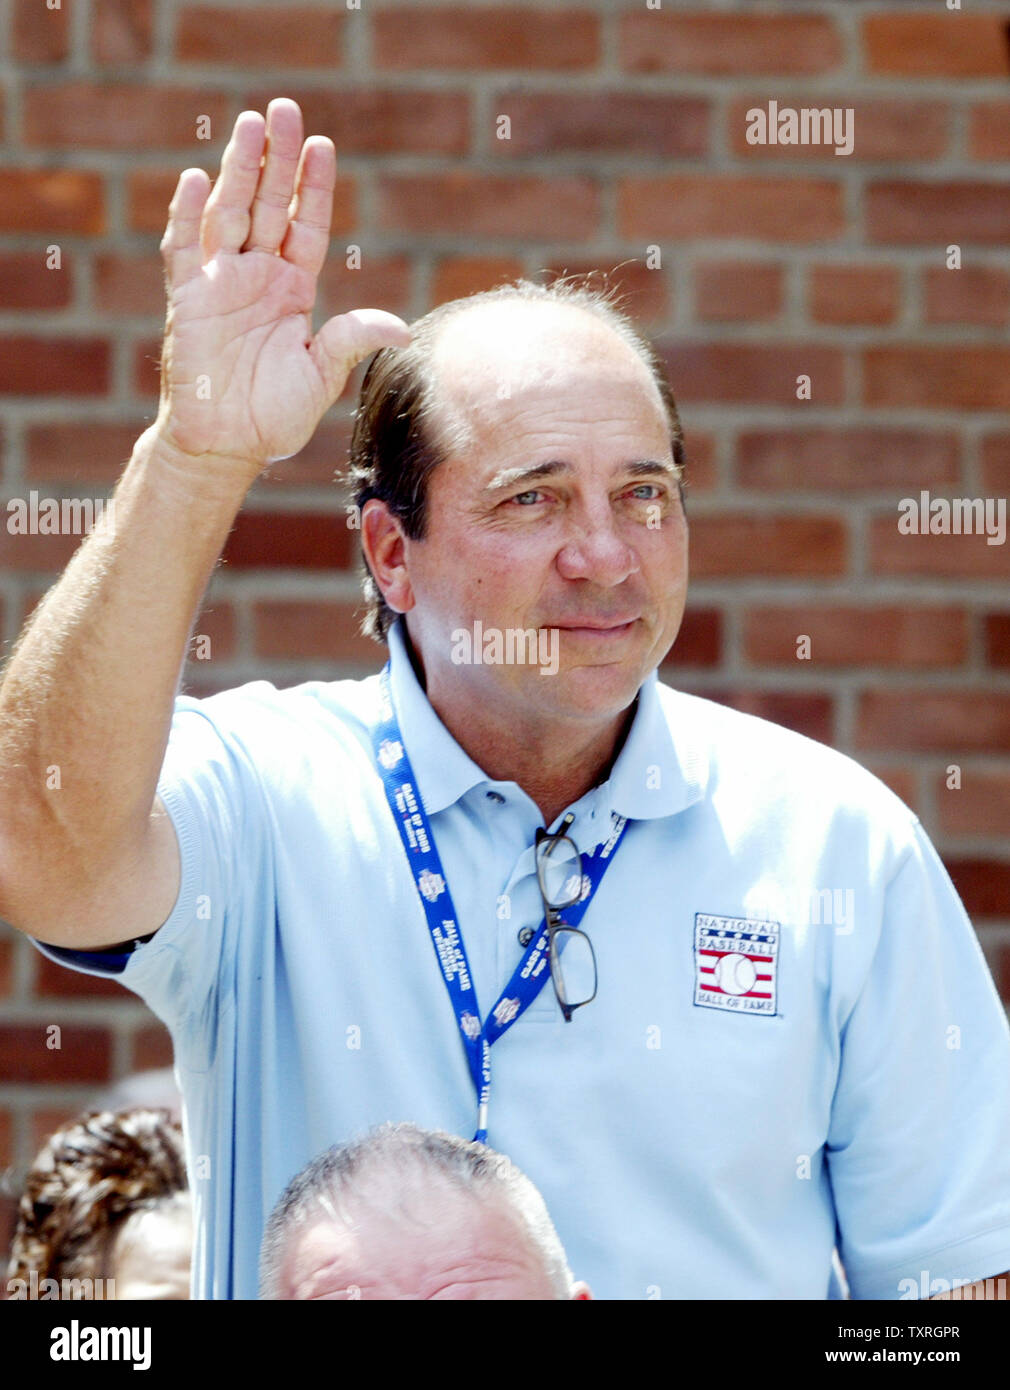 Baseball Hall of Famer Johnny Bench waves to fans during a rededication of  the National Baseball Hall of Fame and Museum building in Cooperstown, NY  on July 29, 2005. This year former